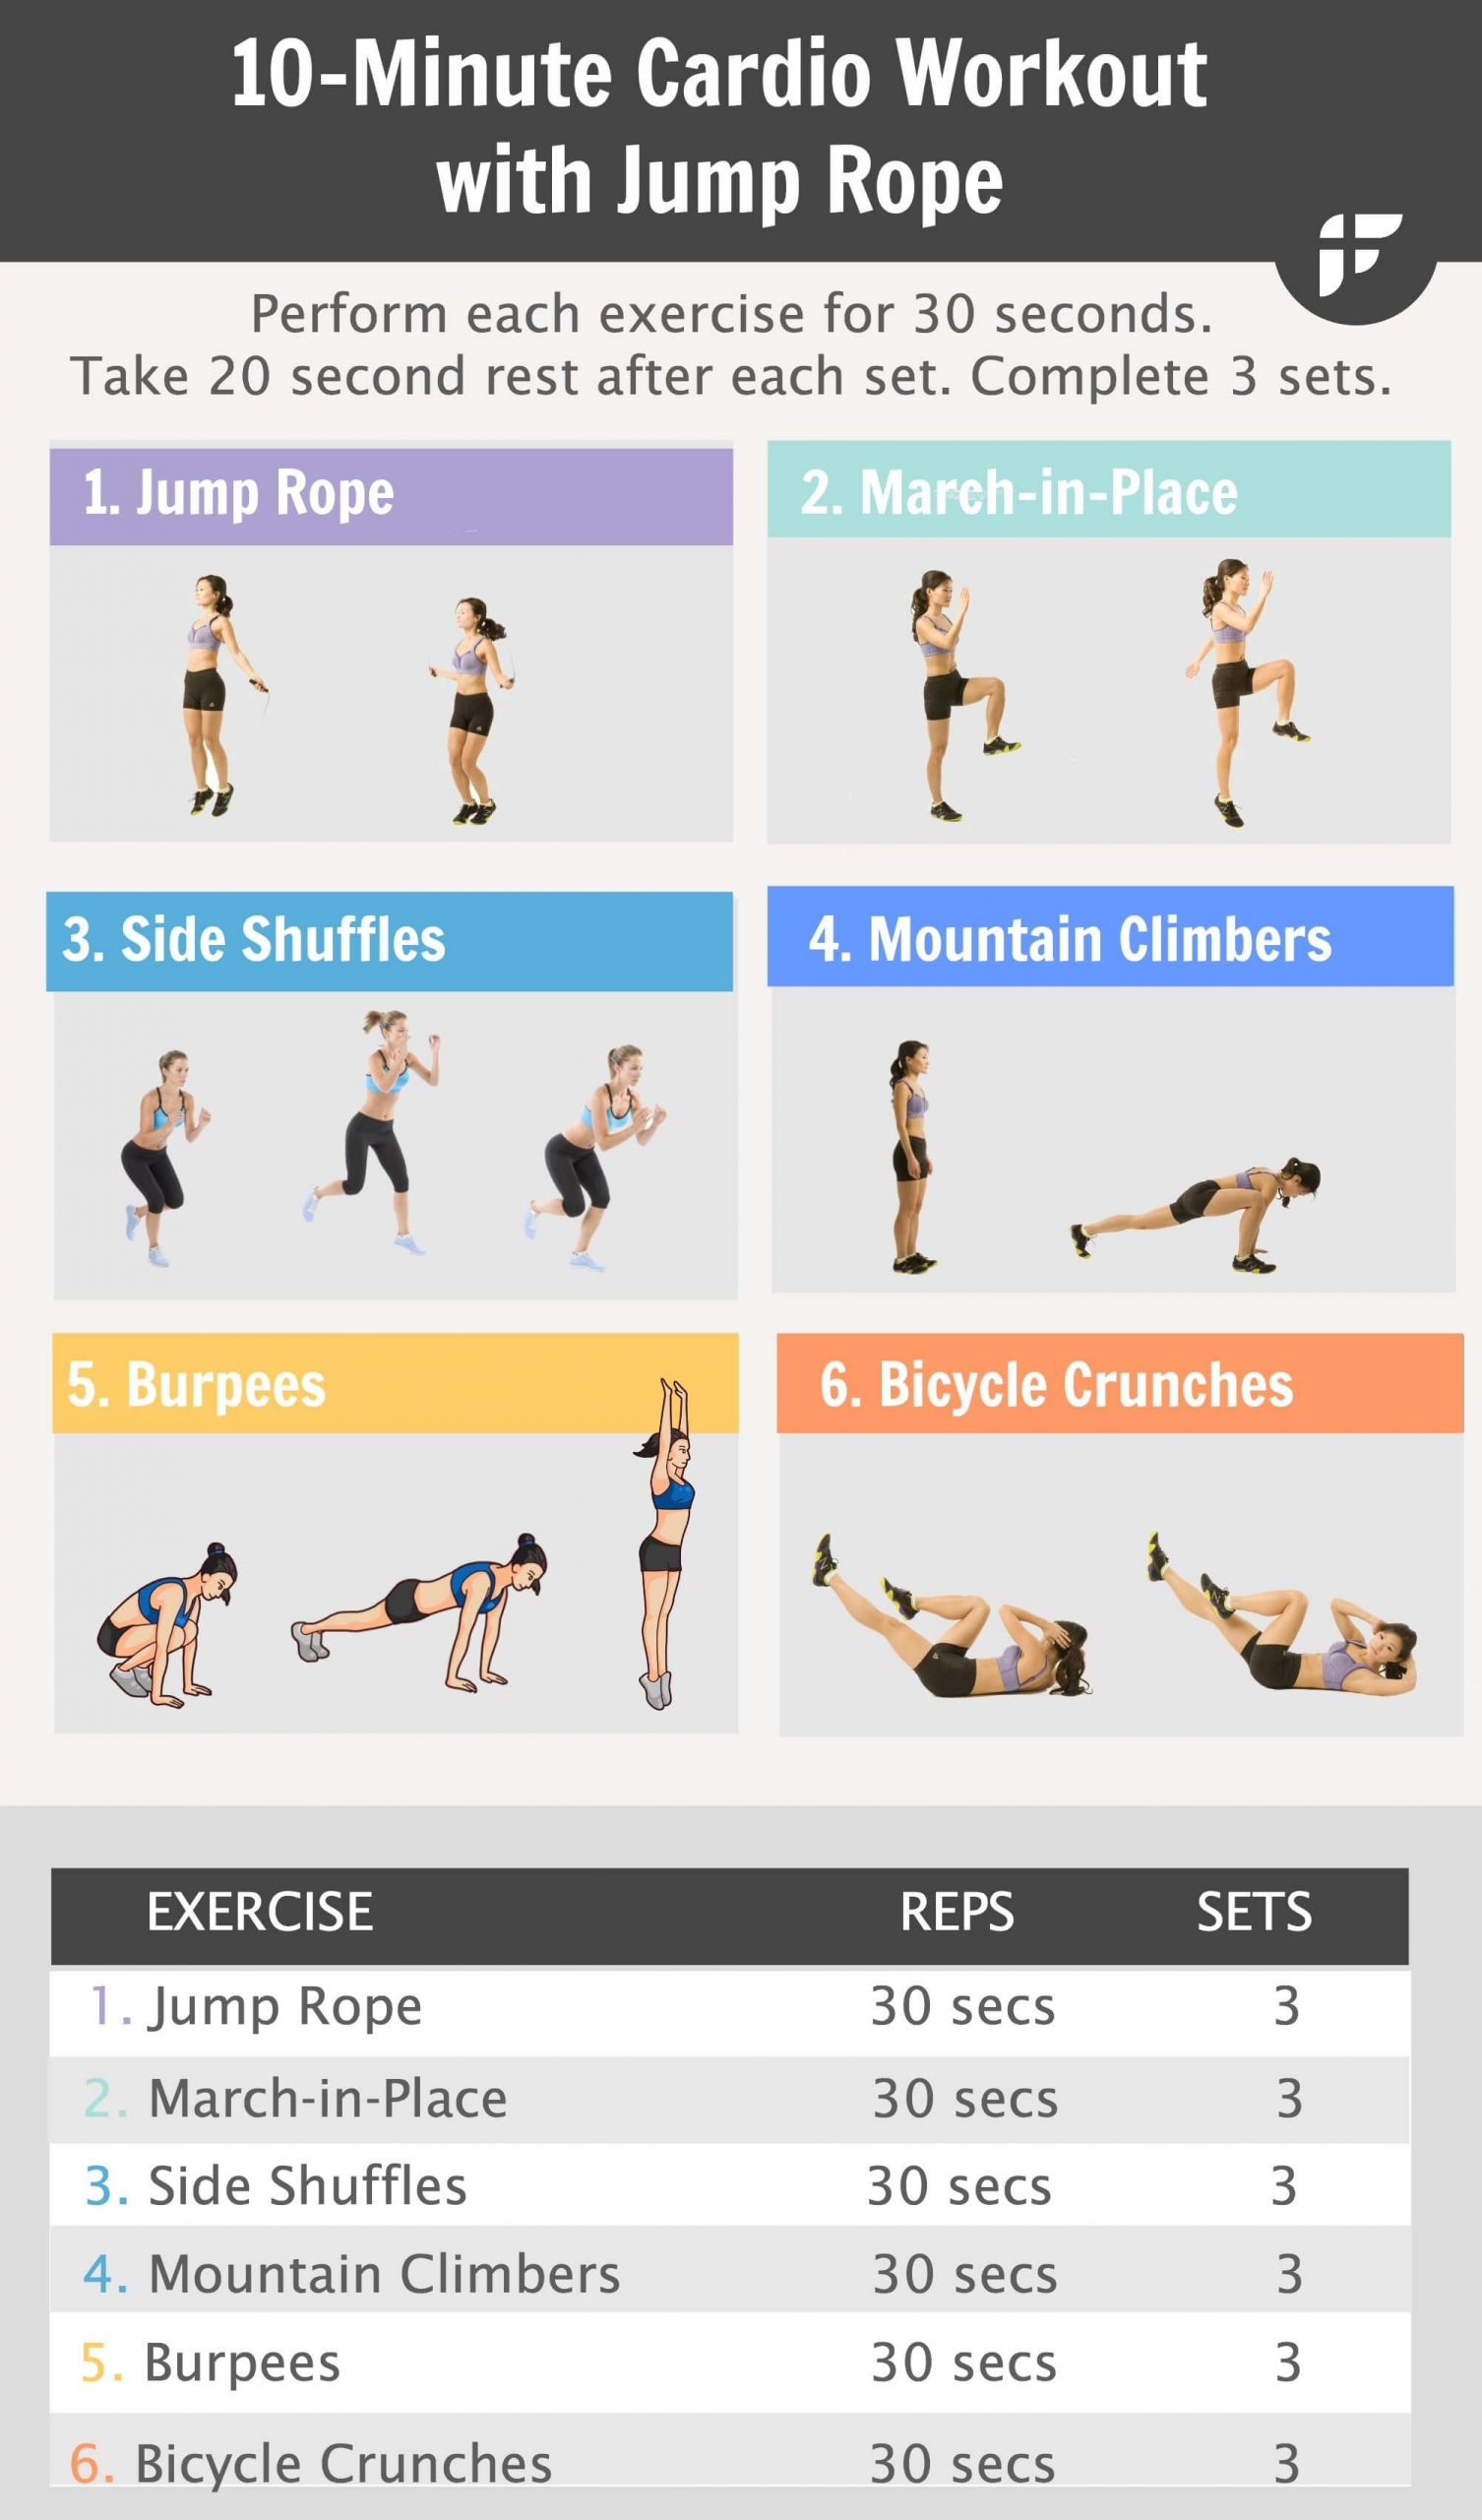 Weight Loss Exercises At Home Fat Burning Cardio Workouts
 25 HIIT Cardio Workouts That Will Get You In The Best